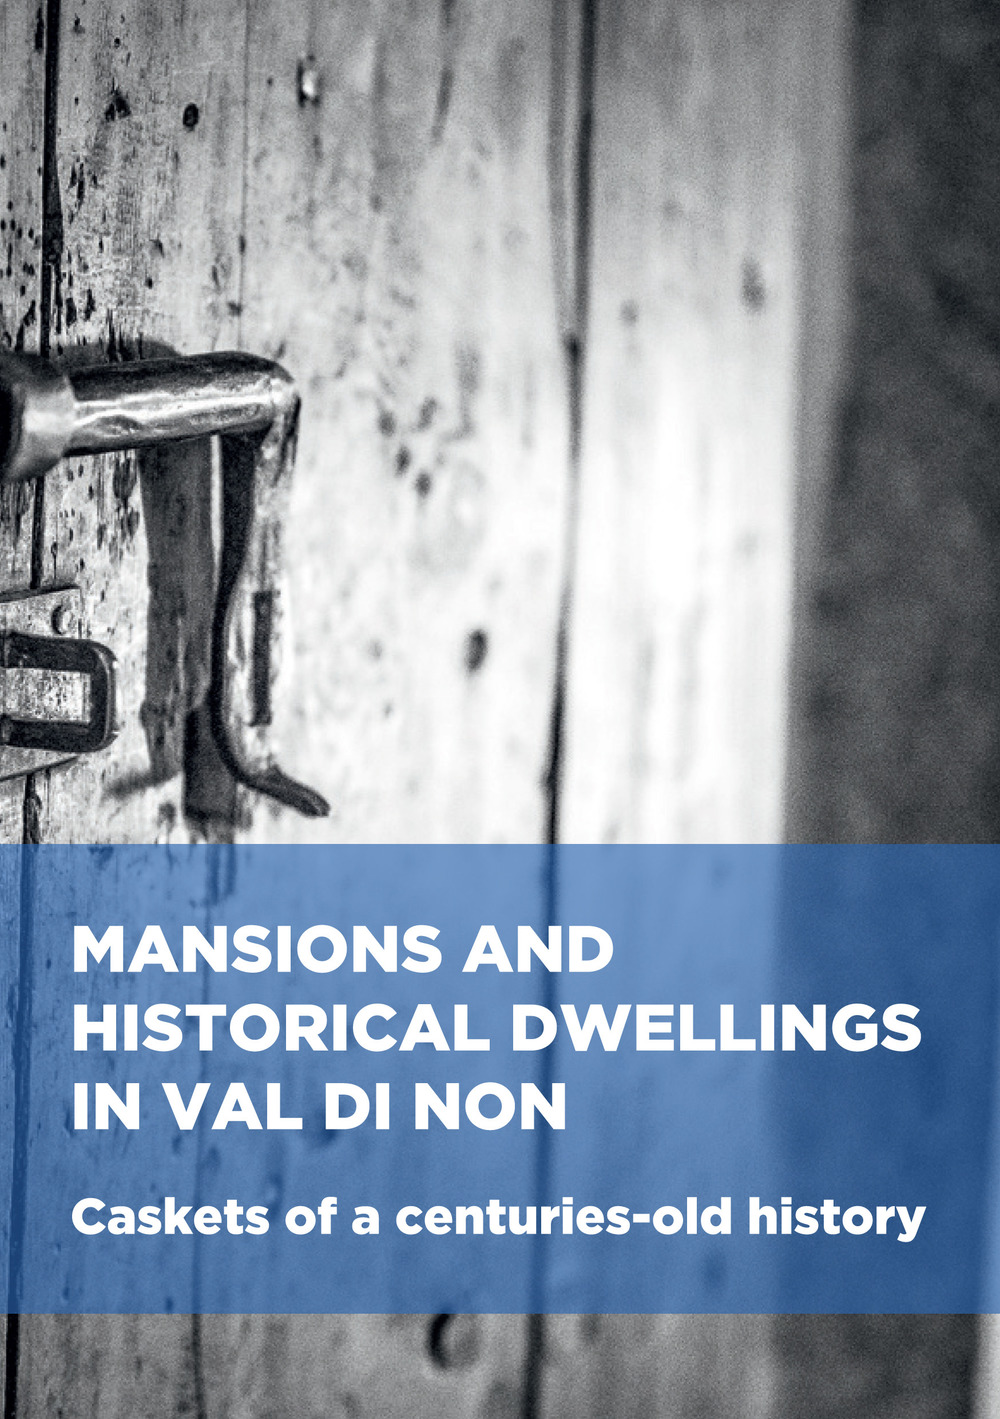 Mansions and historical dwellings in Val di Non. Caskets of centuries-old history